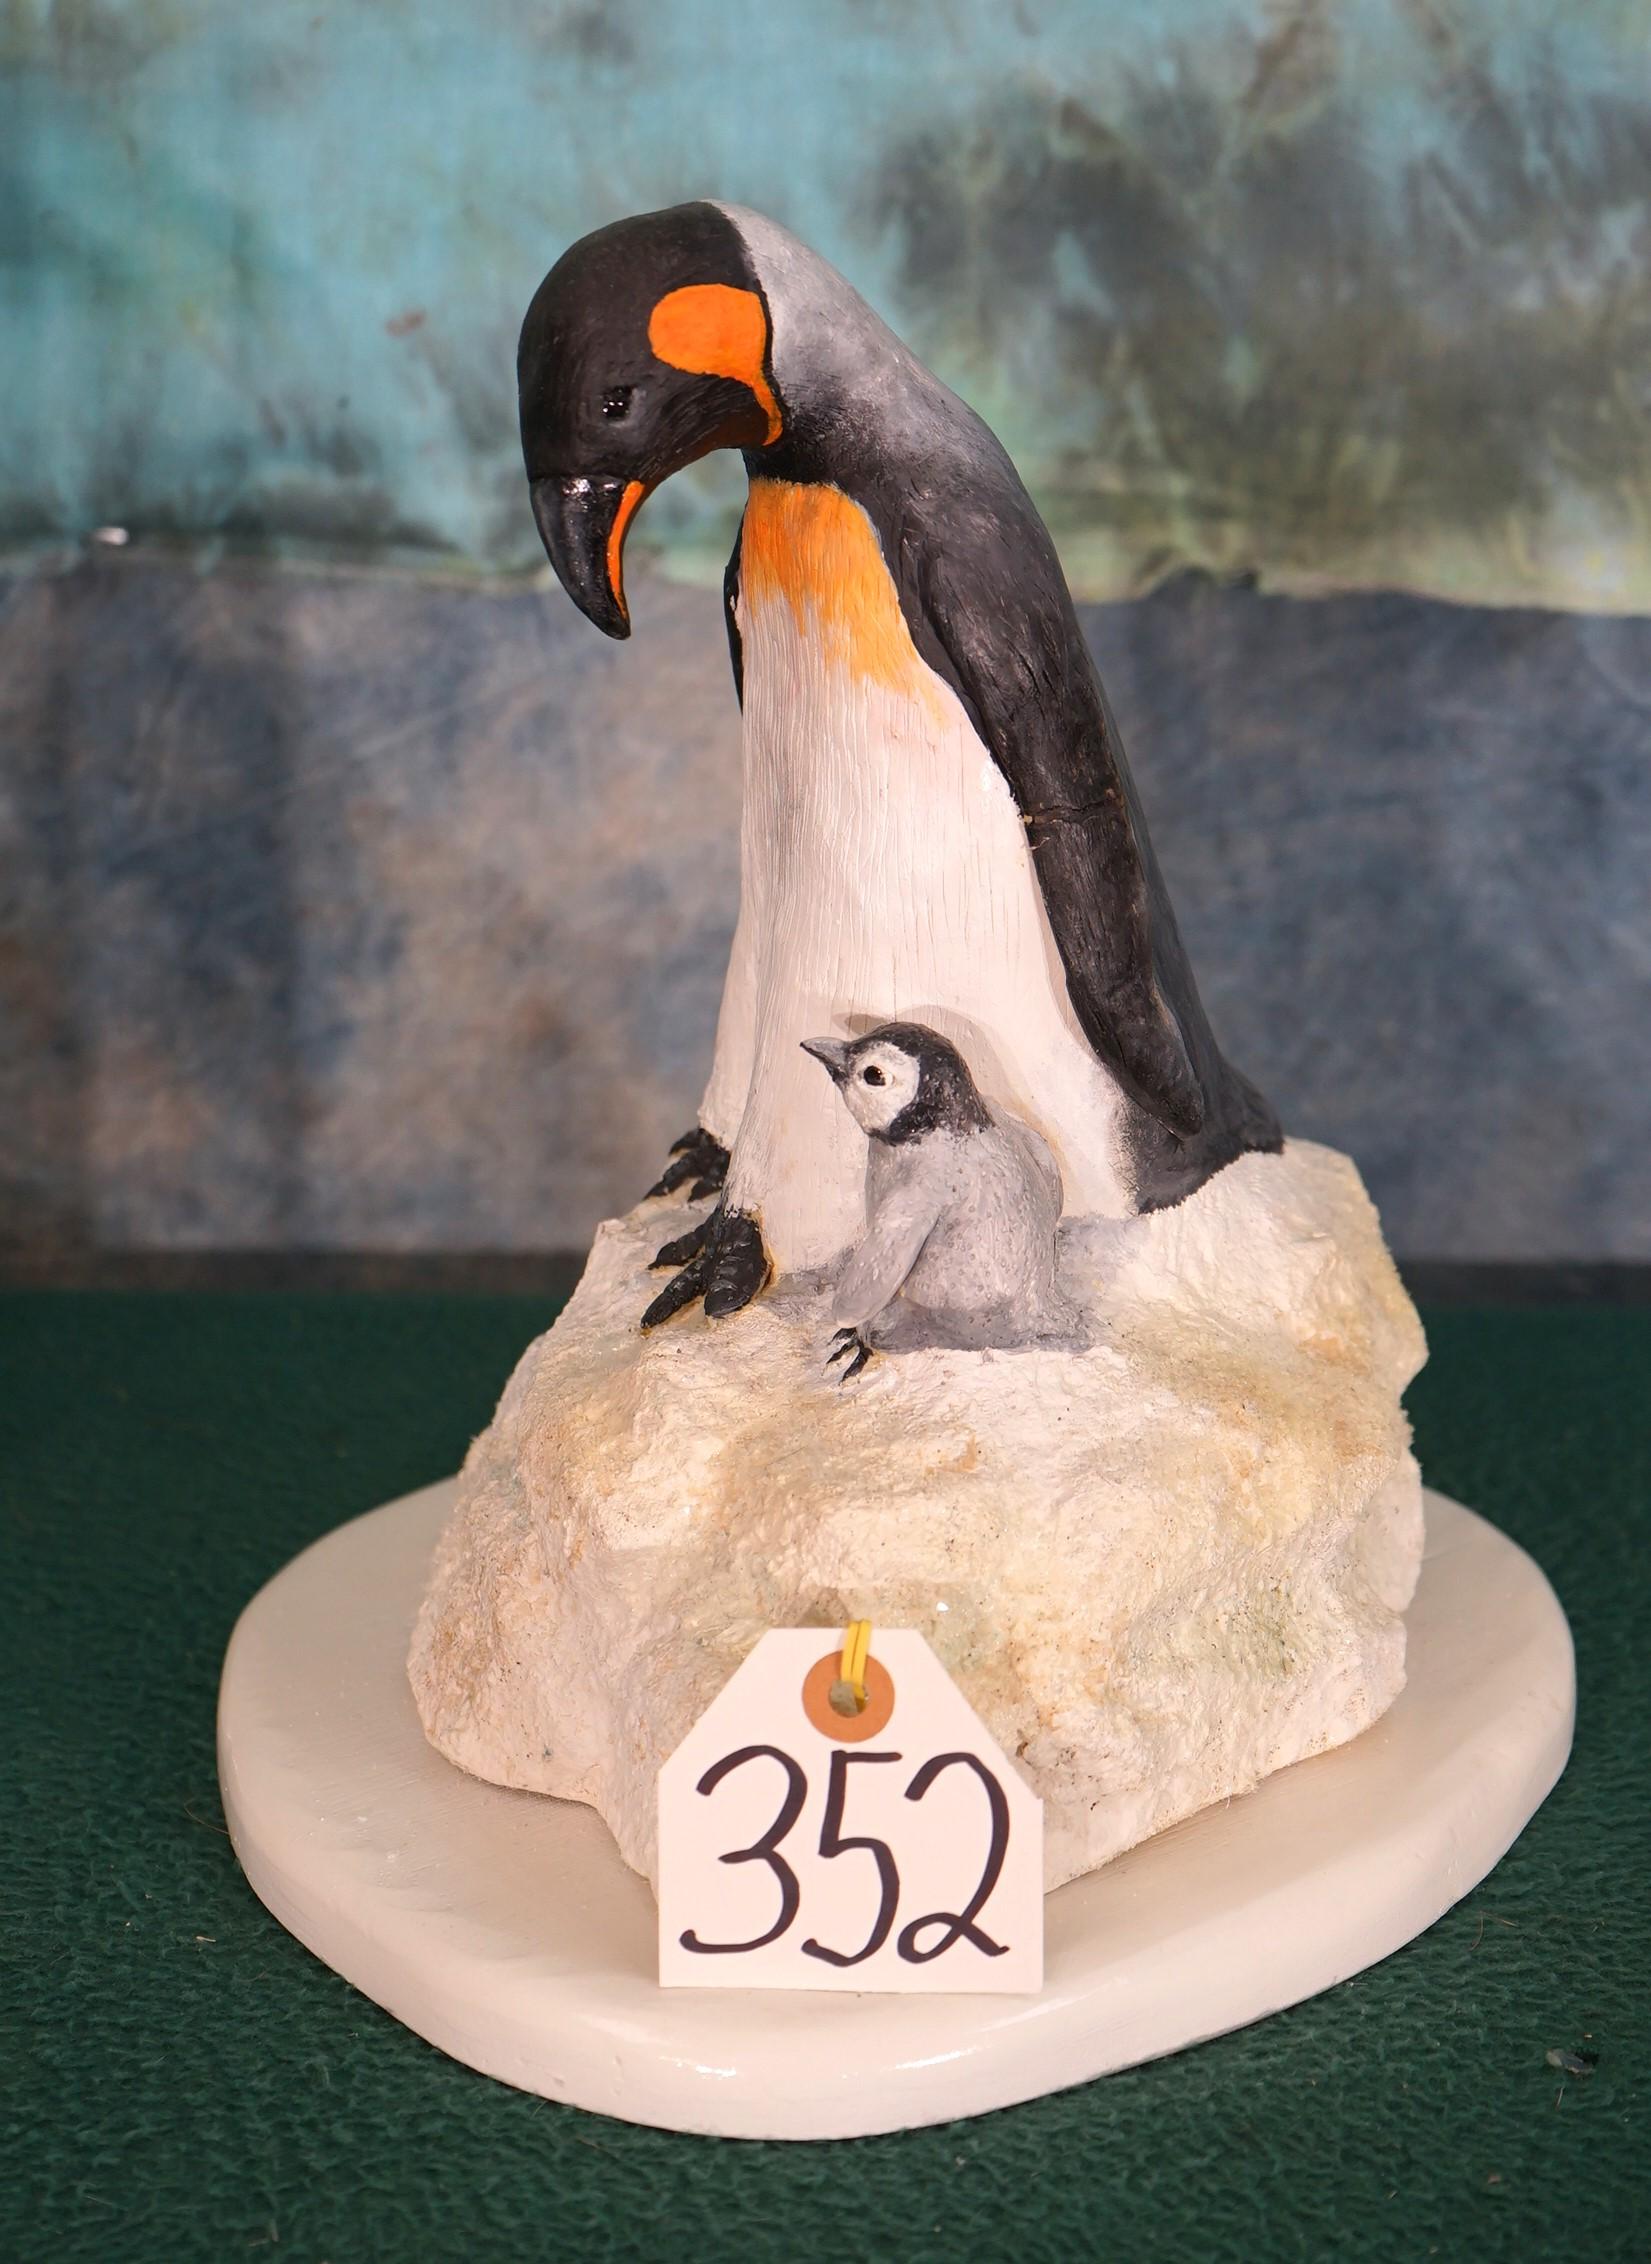 Sculpture of Mother Penguin with Baby called "Cold Feet"